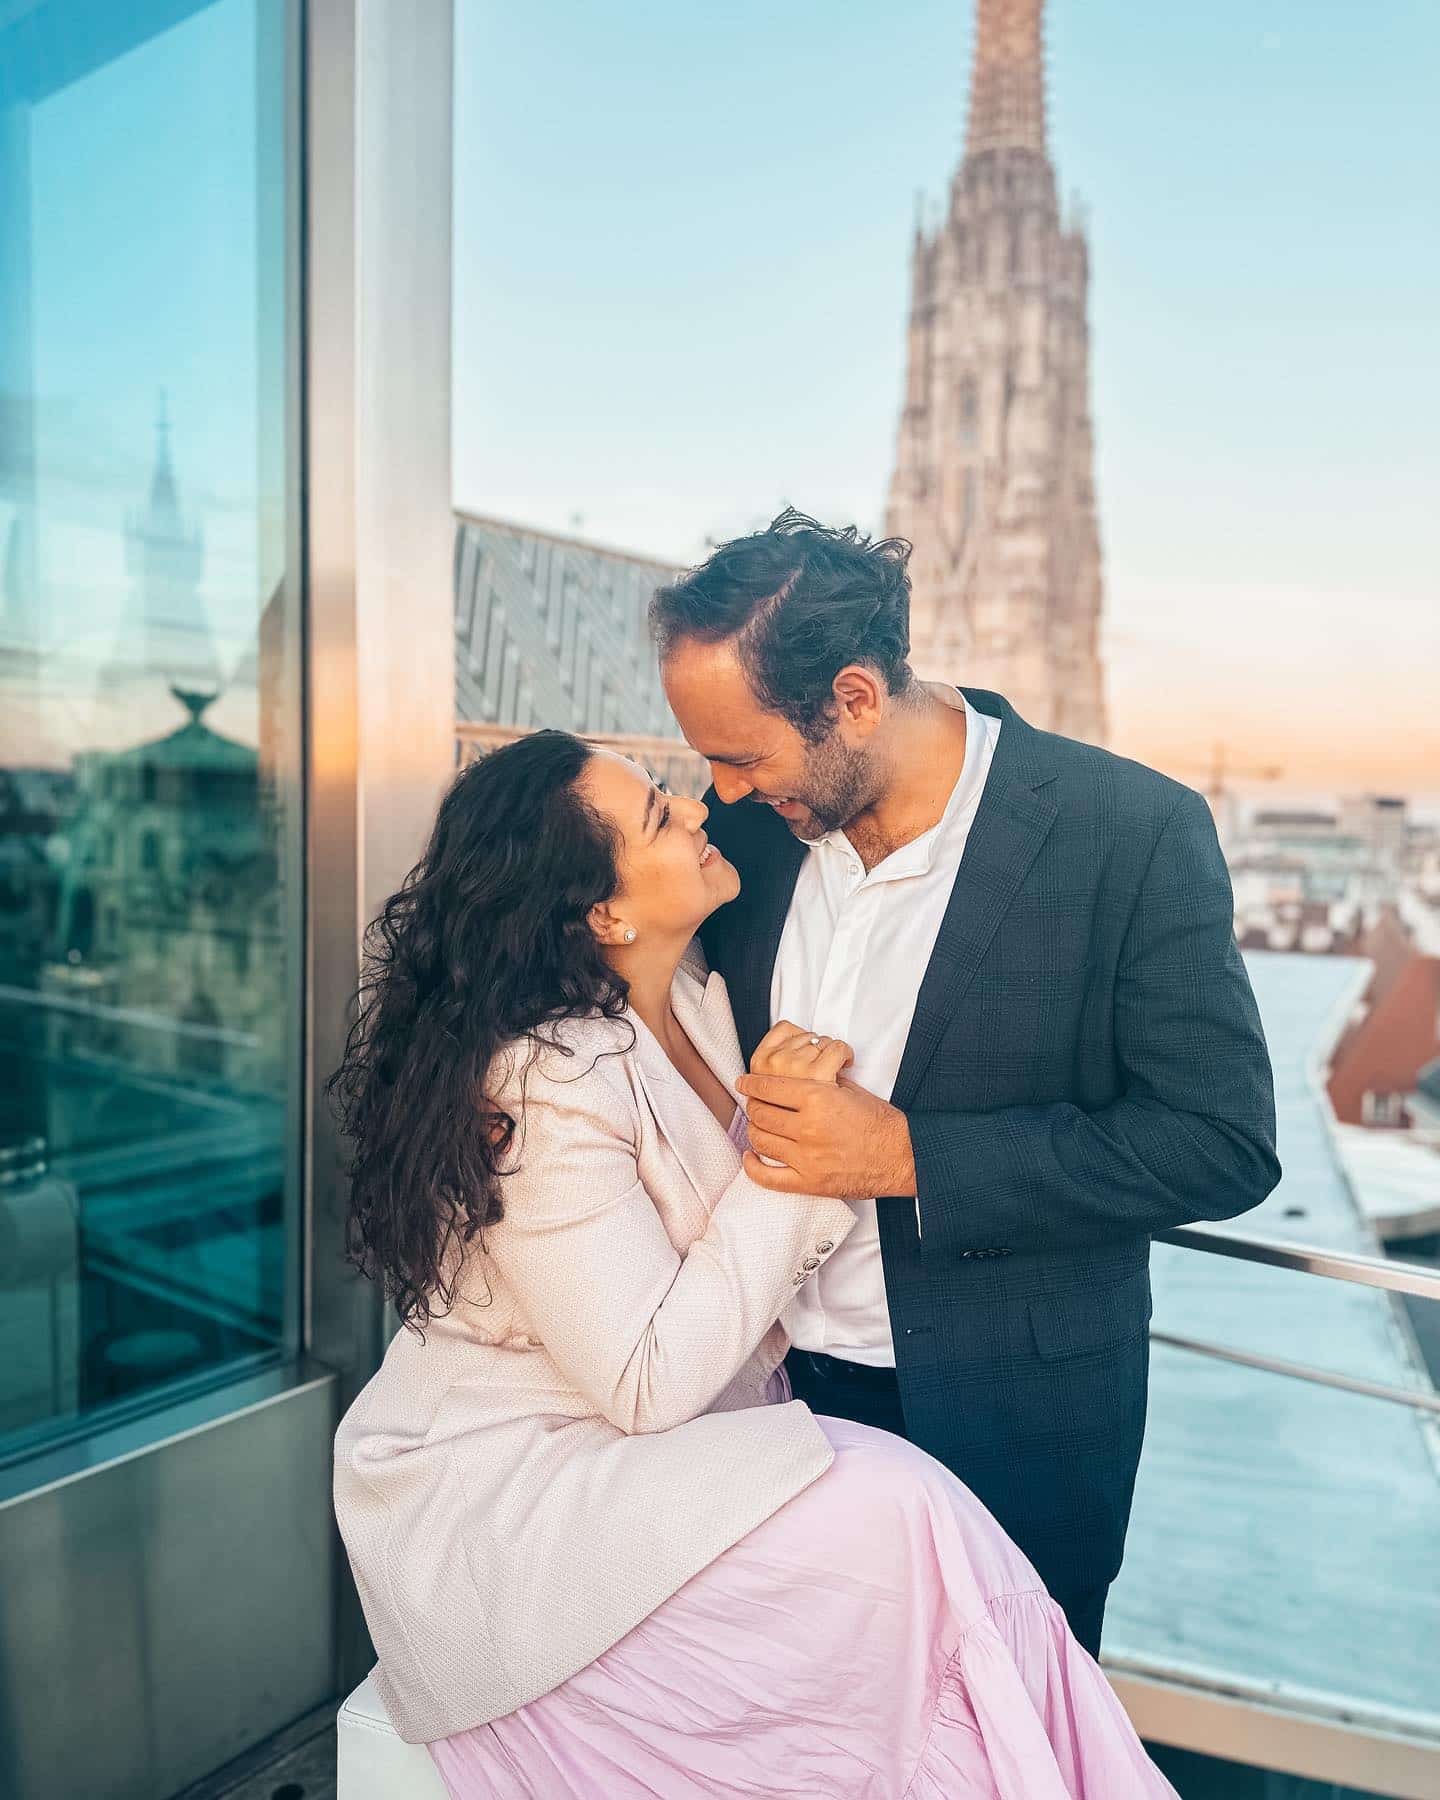 Love in Vienna as two opera singers get engaged